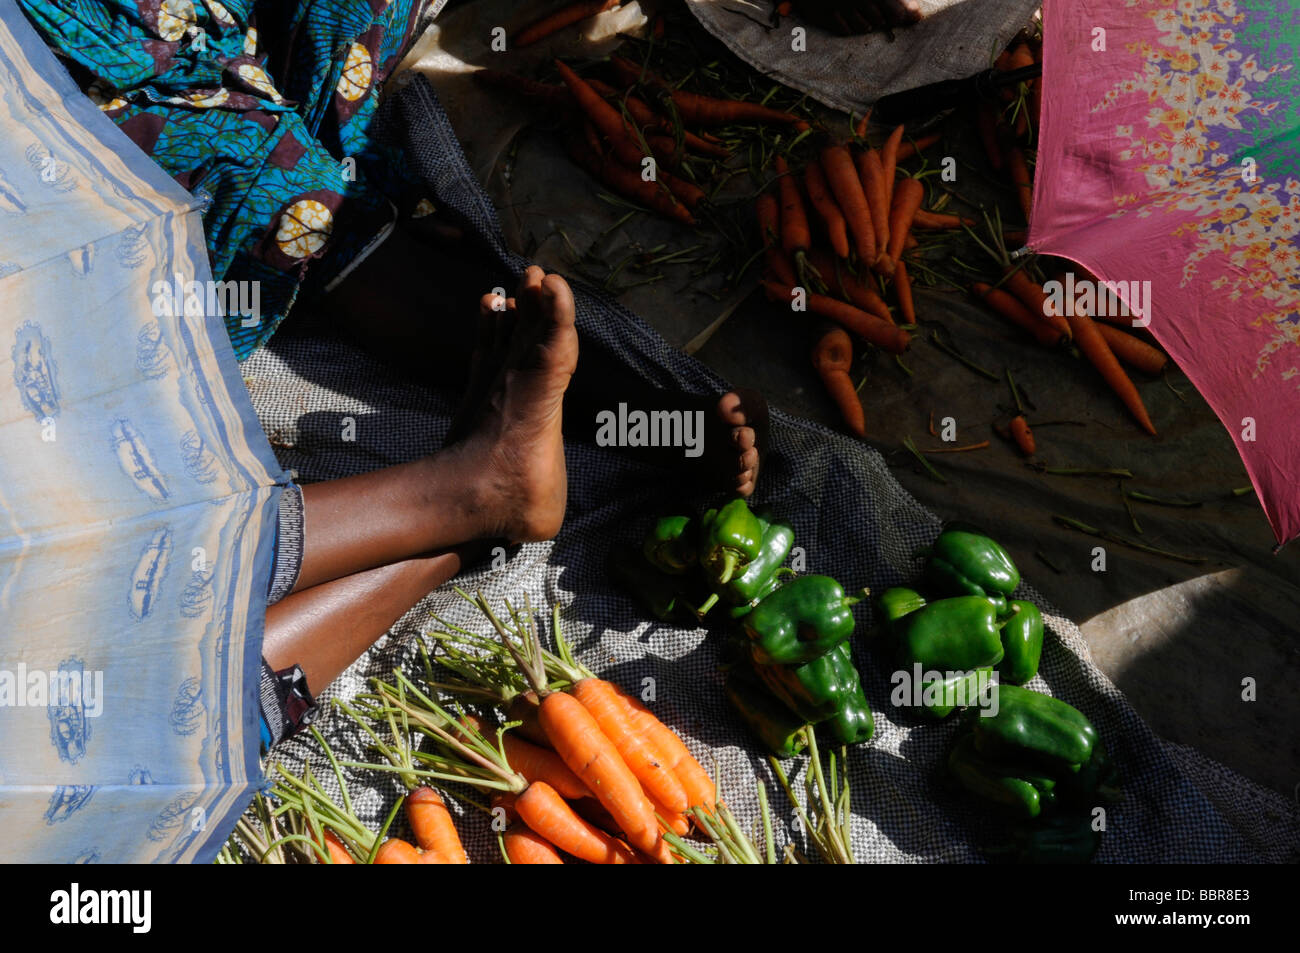 The vegetables market in Lilongwe capital of Malawi Africa Stock Photo